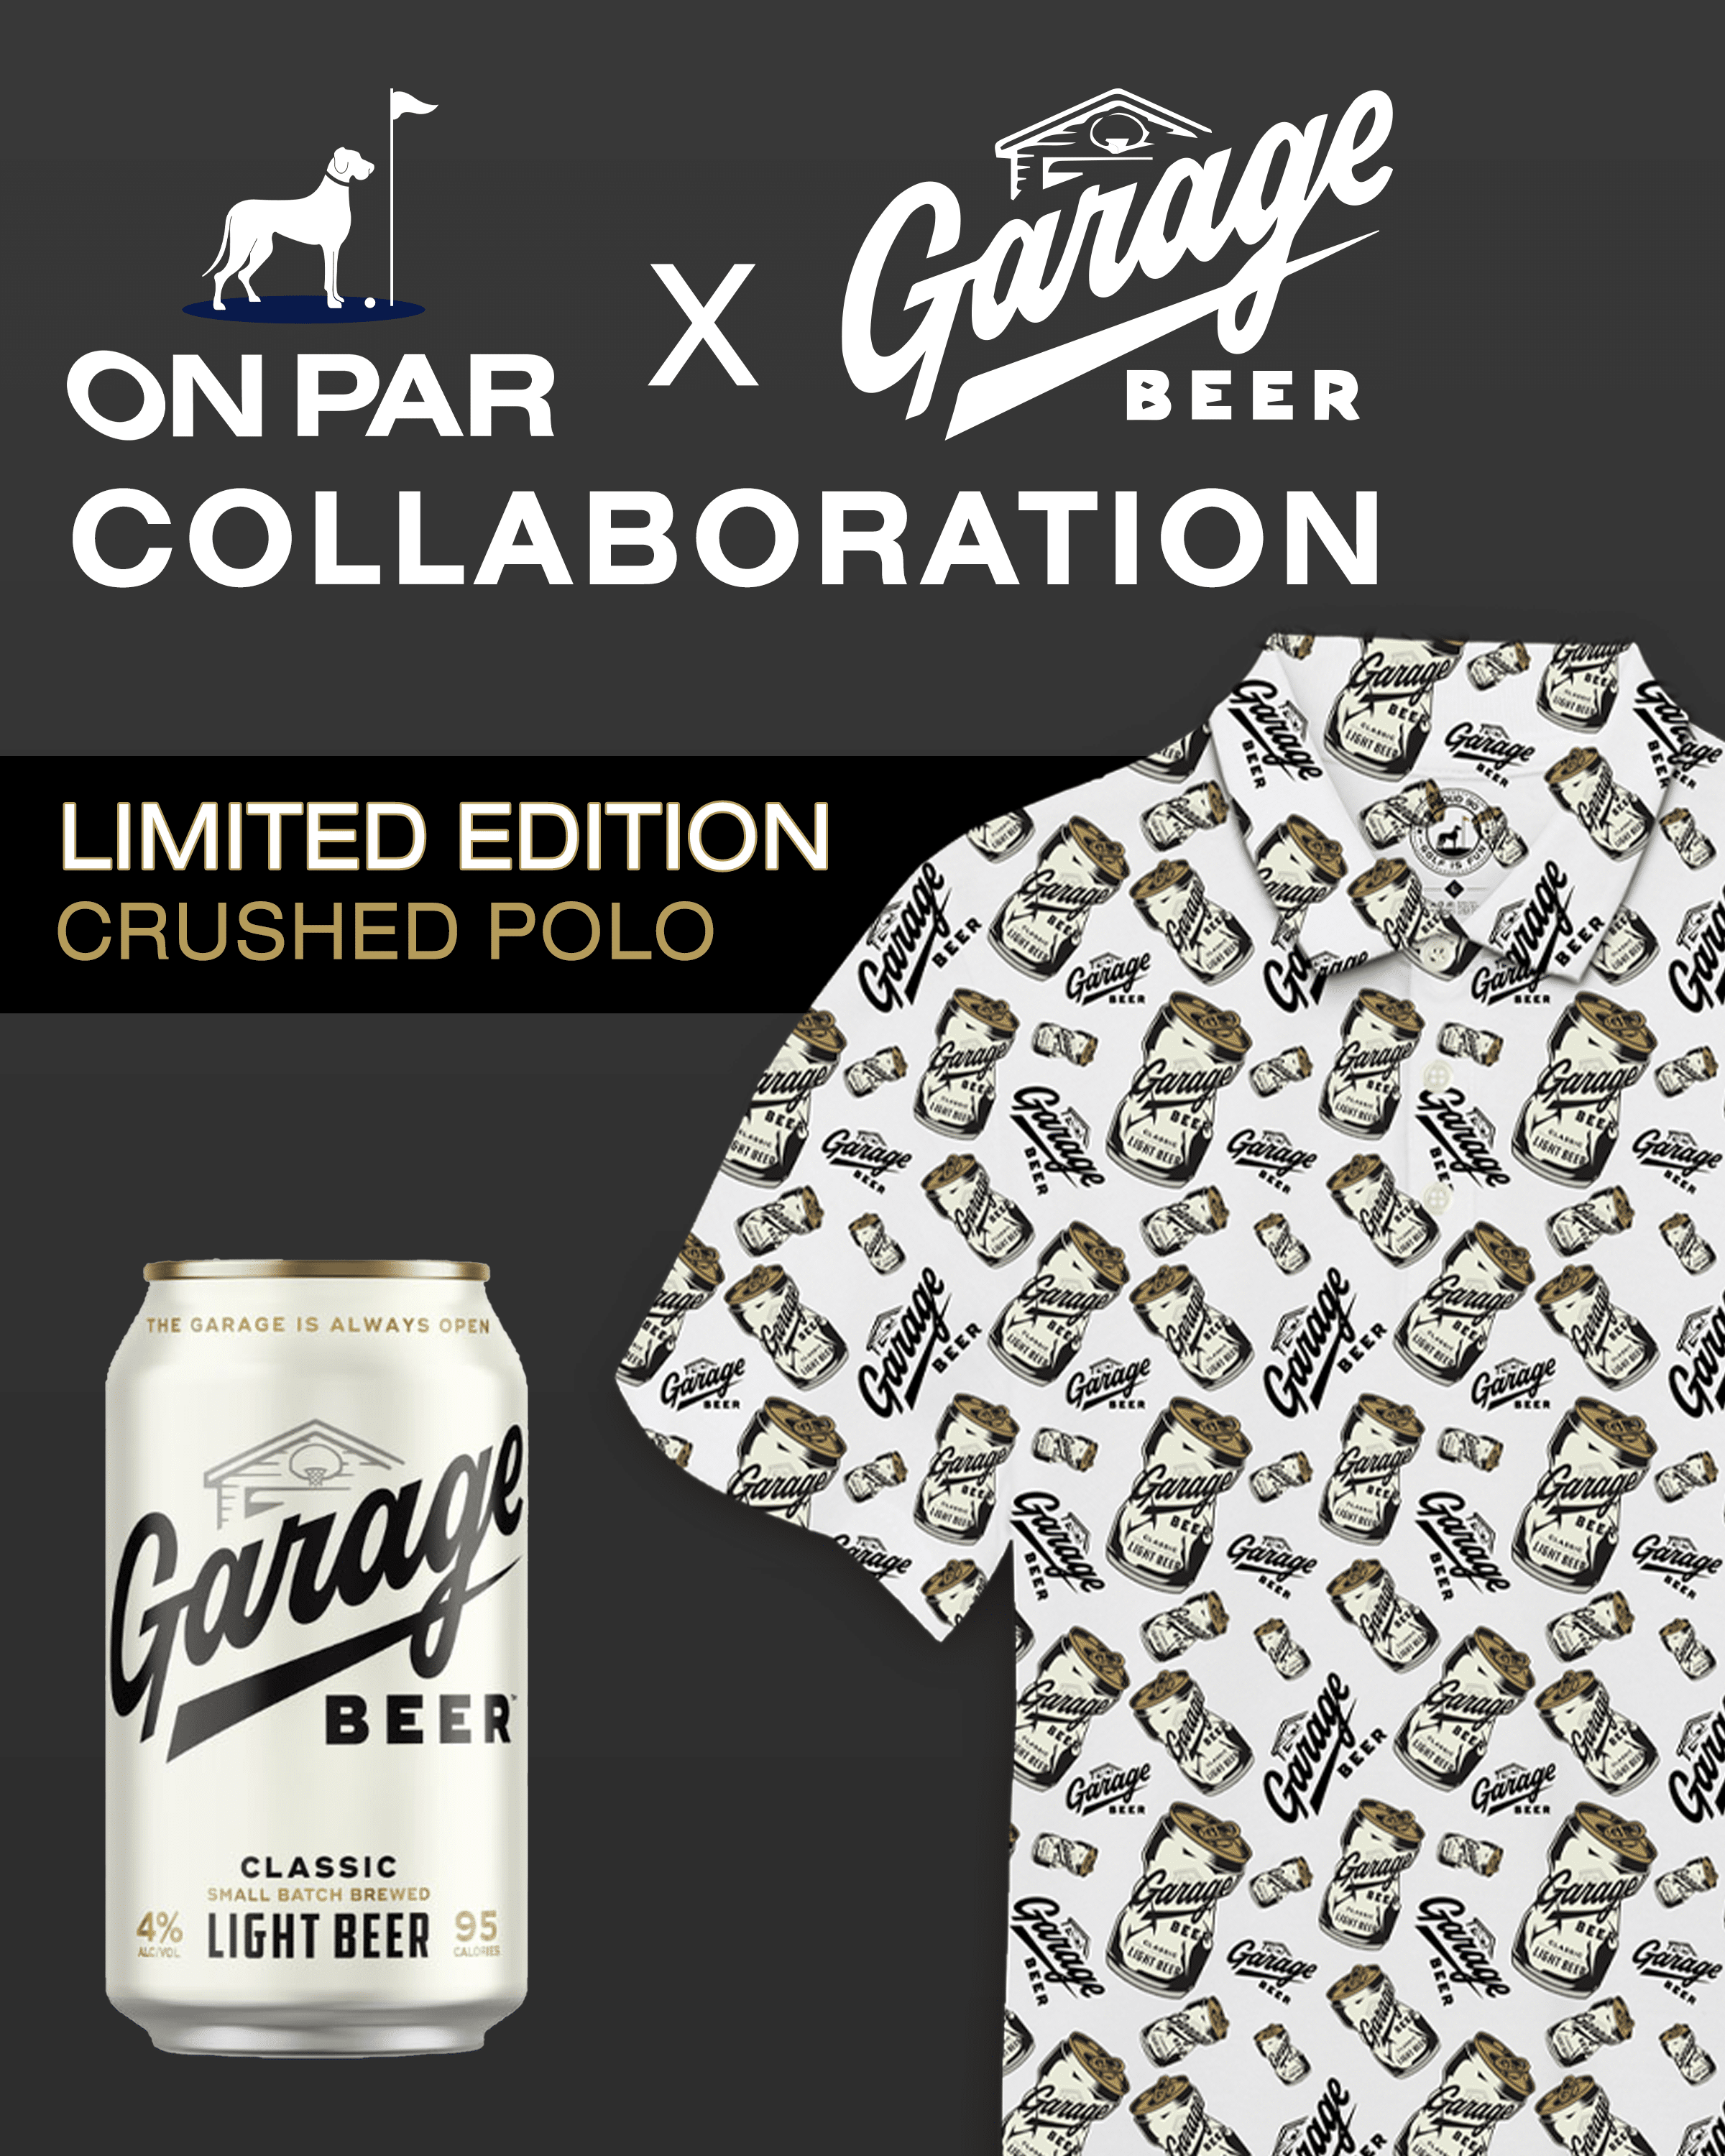 On Par x Garage Beer Limited Edition Crushed Polo Men's Forever Collection Proud 90 